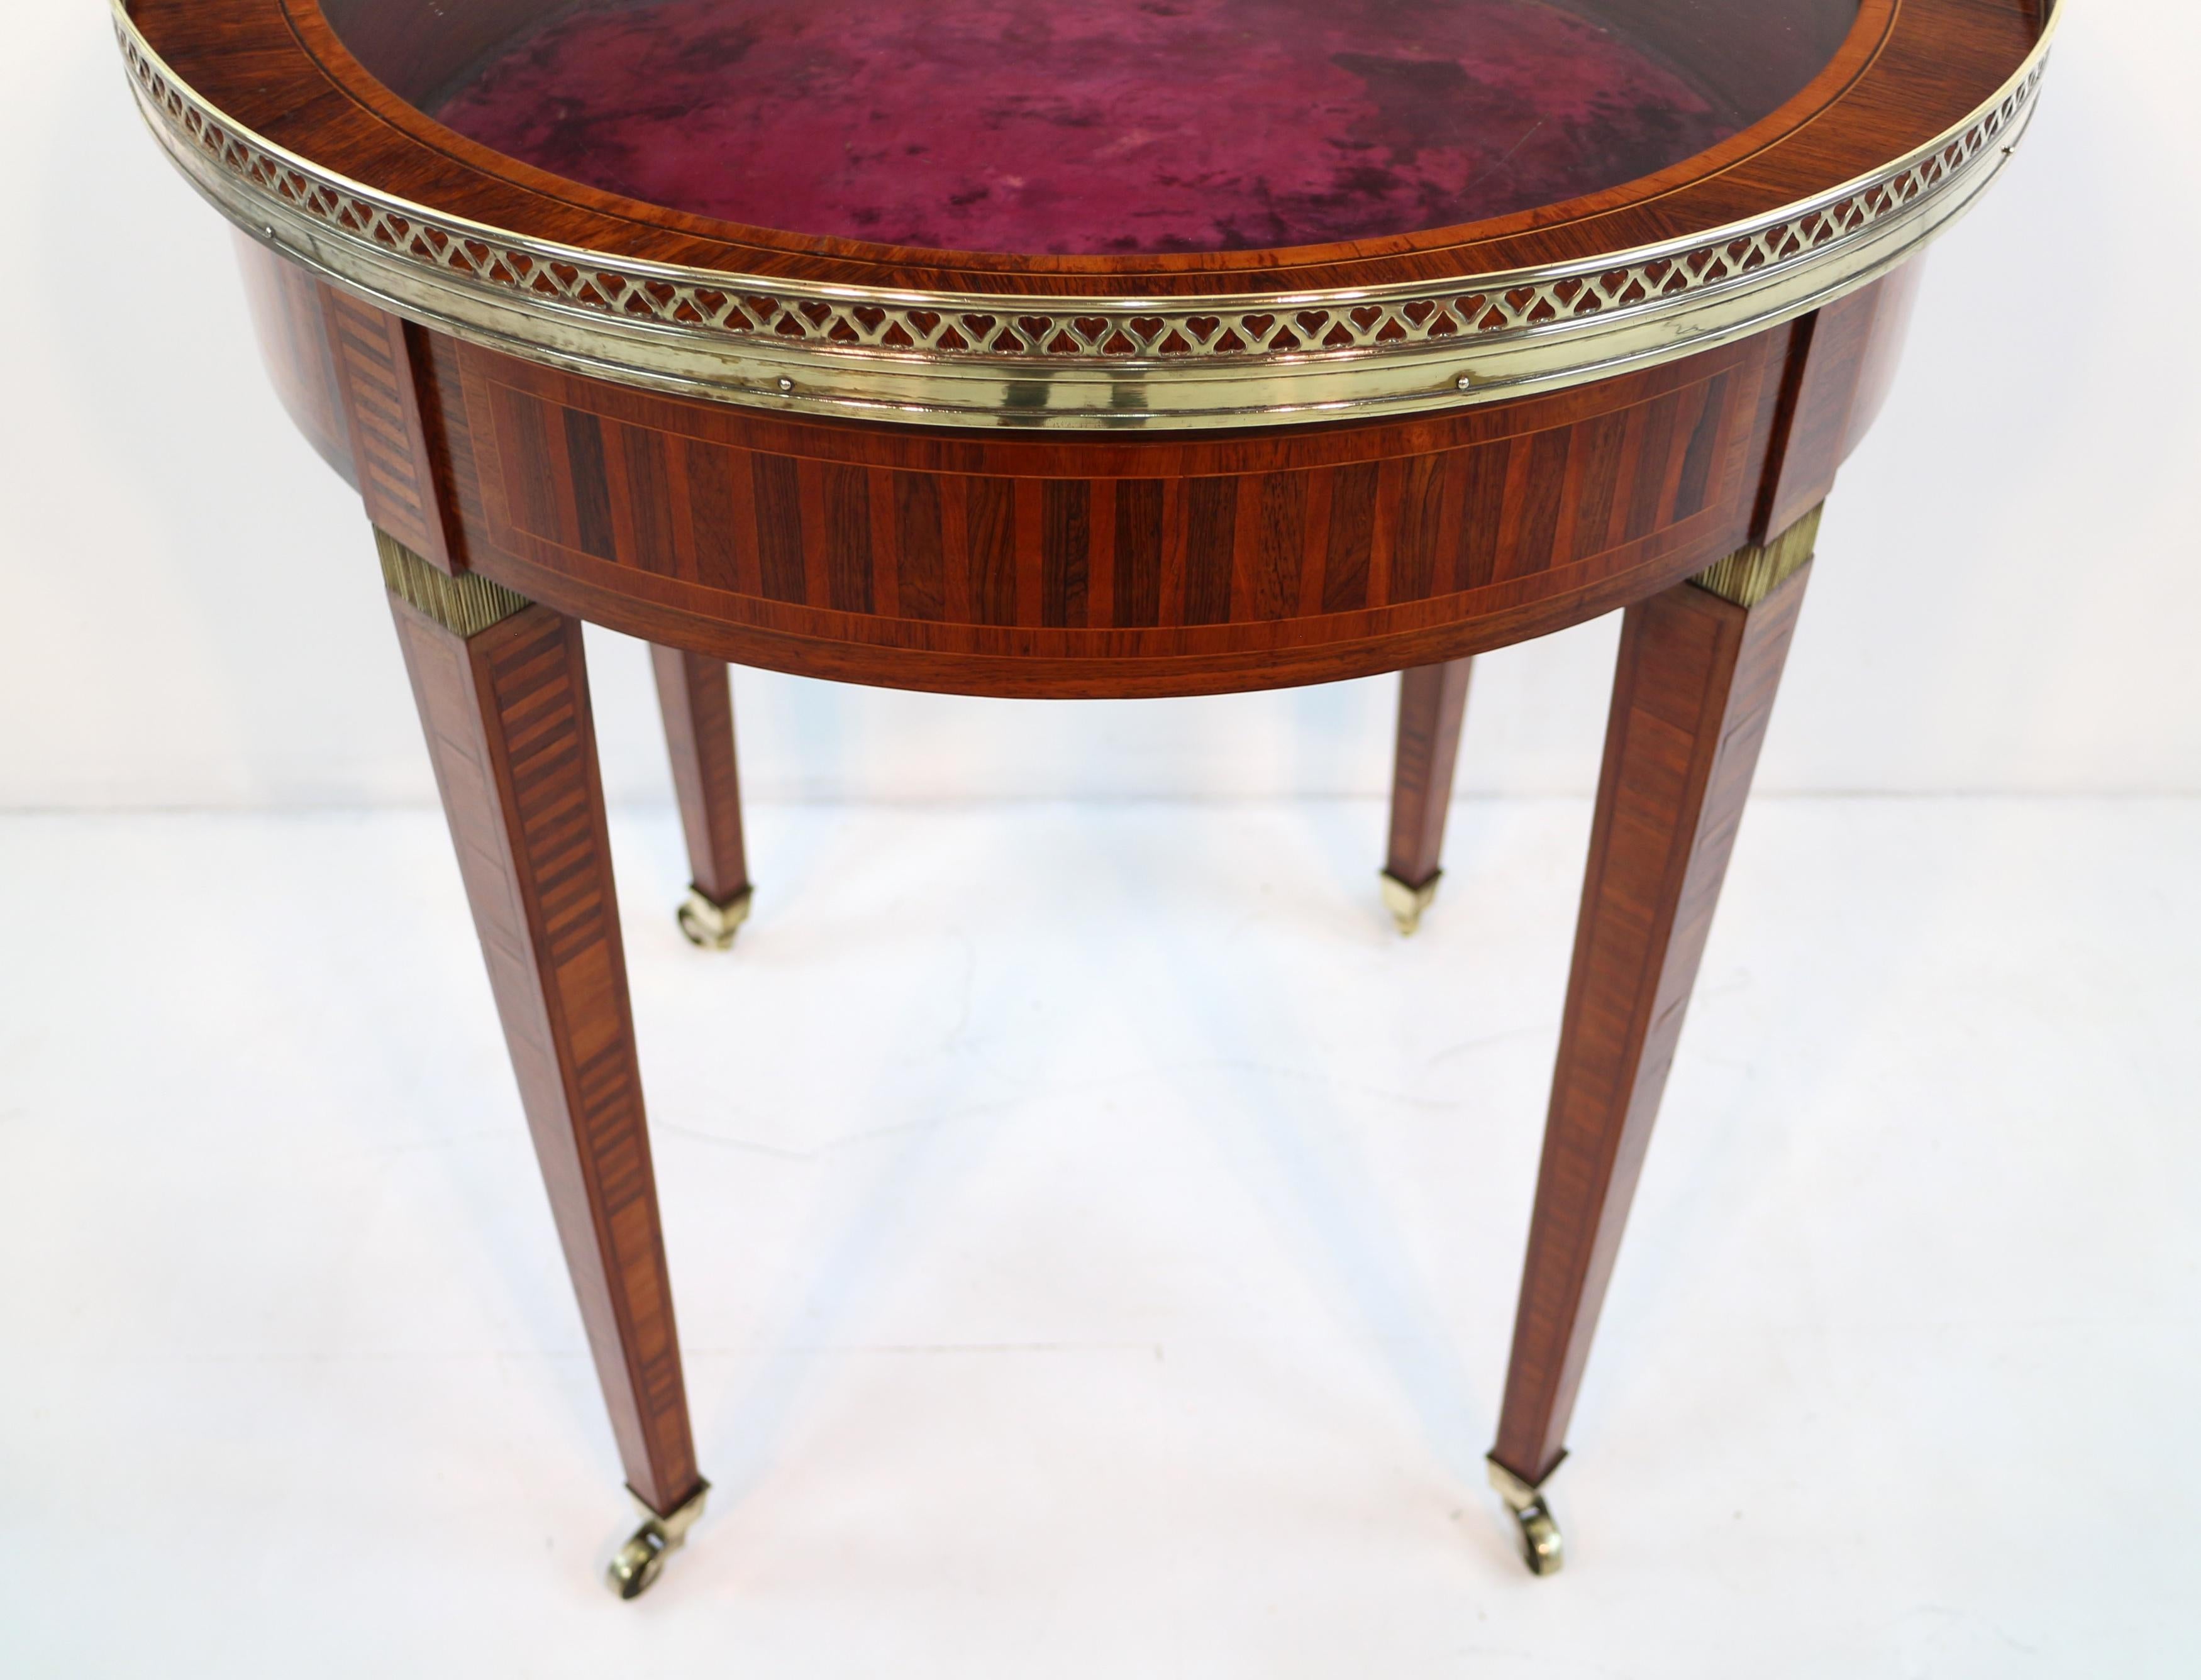 Antique English Victorian Sheraton Revival Rosewood & Parquetry Bijouterie Table For Sale 13